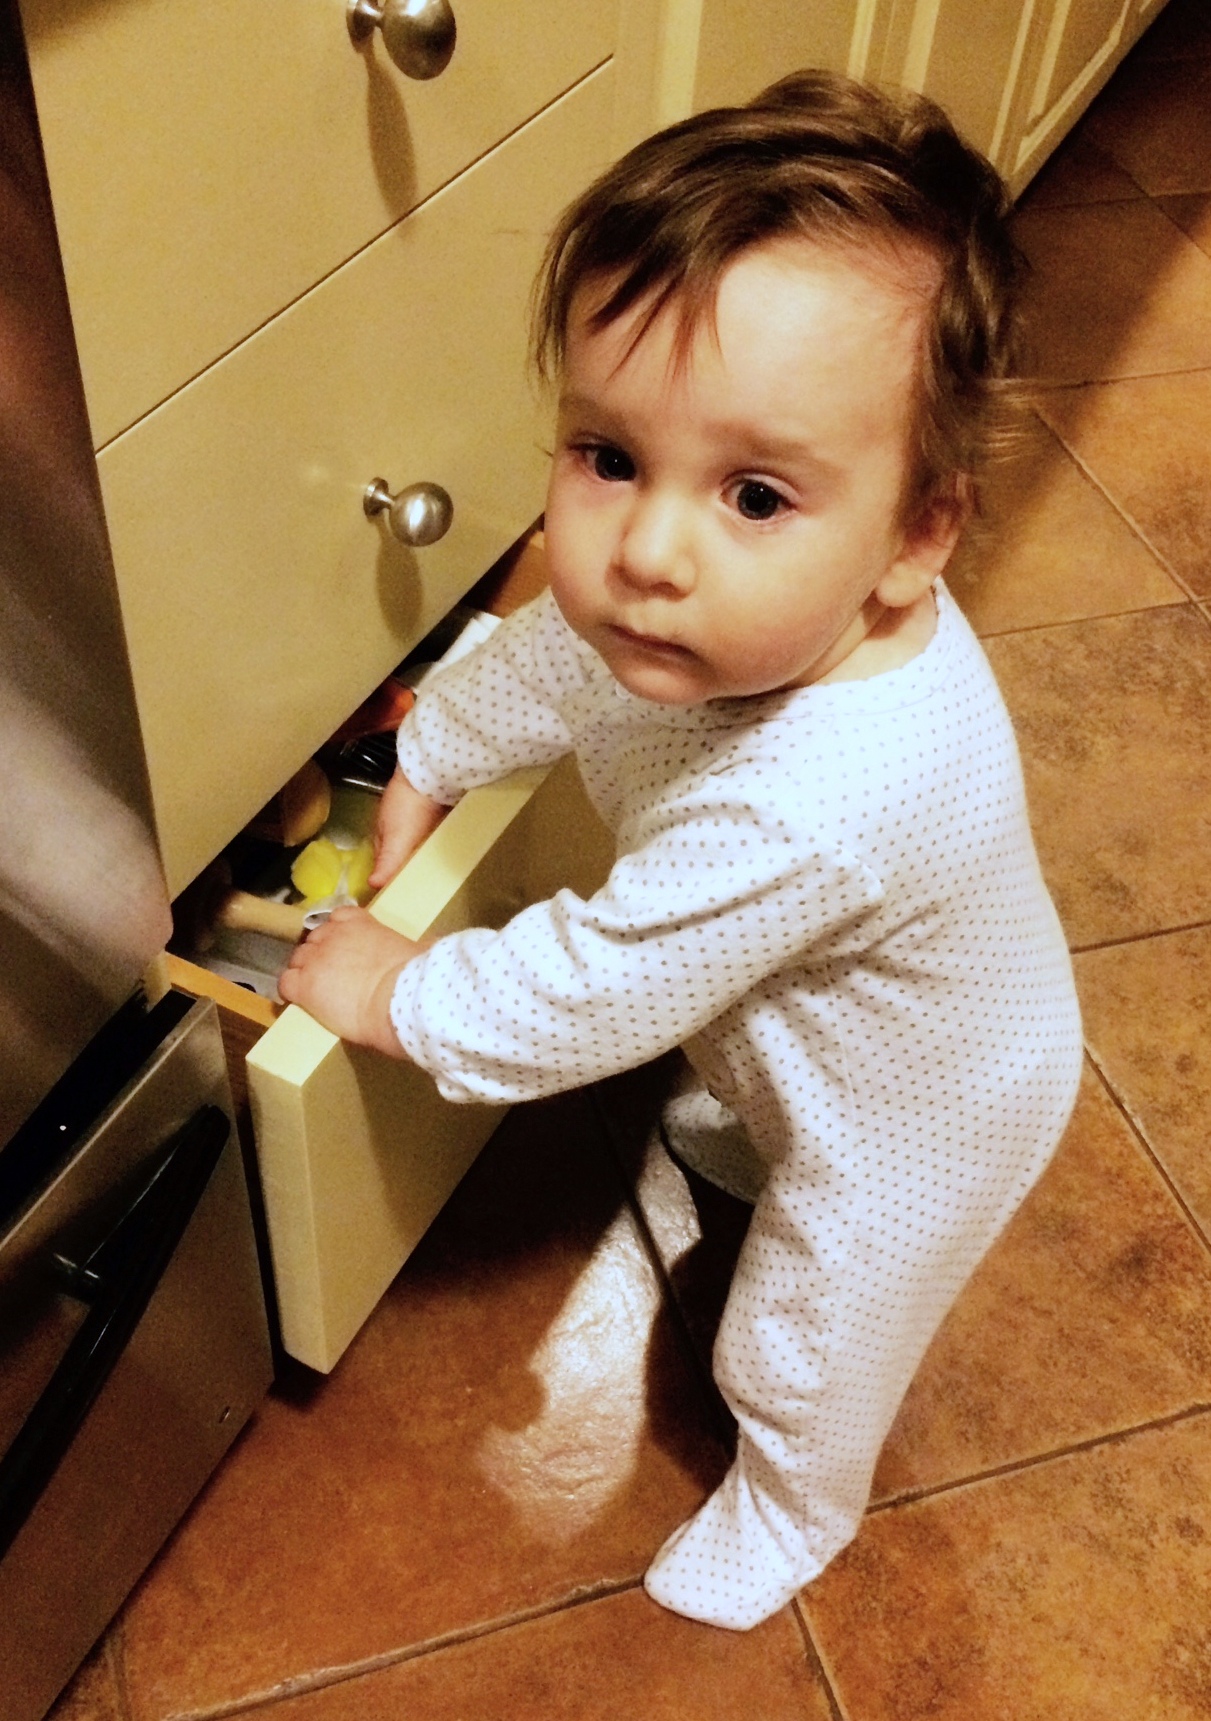 a little child playing with food in the kitchen